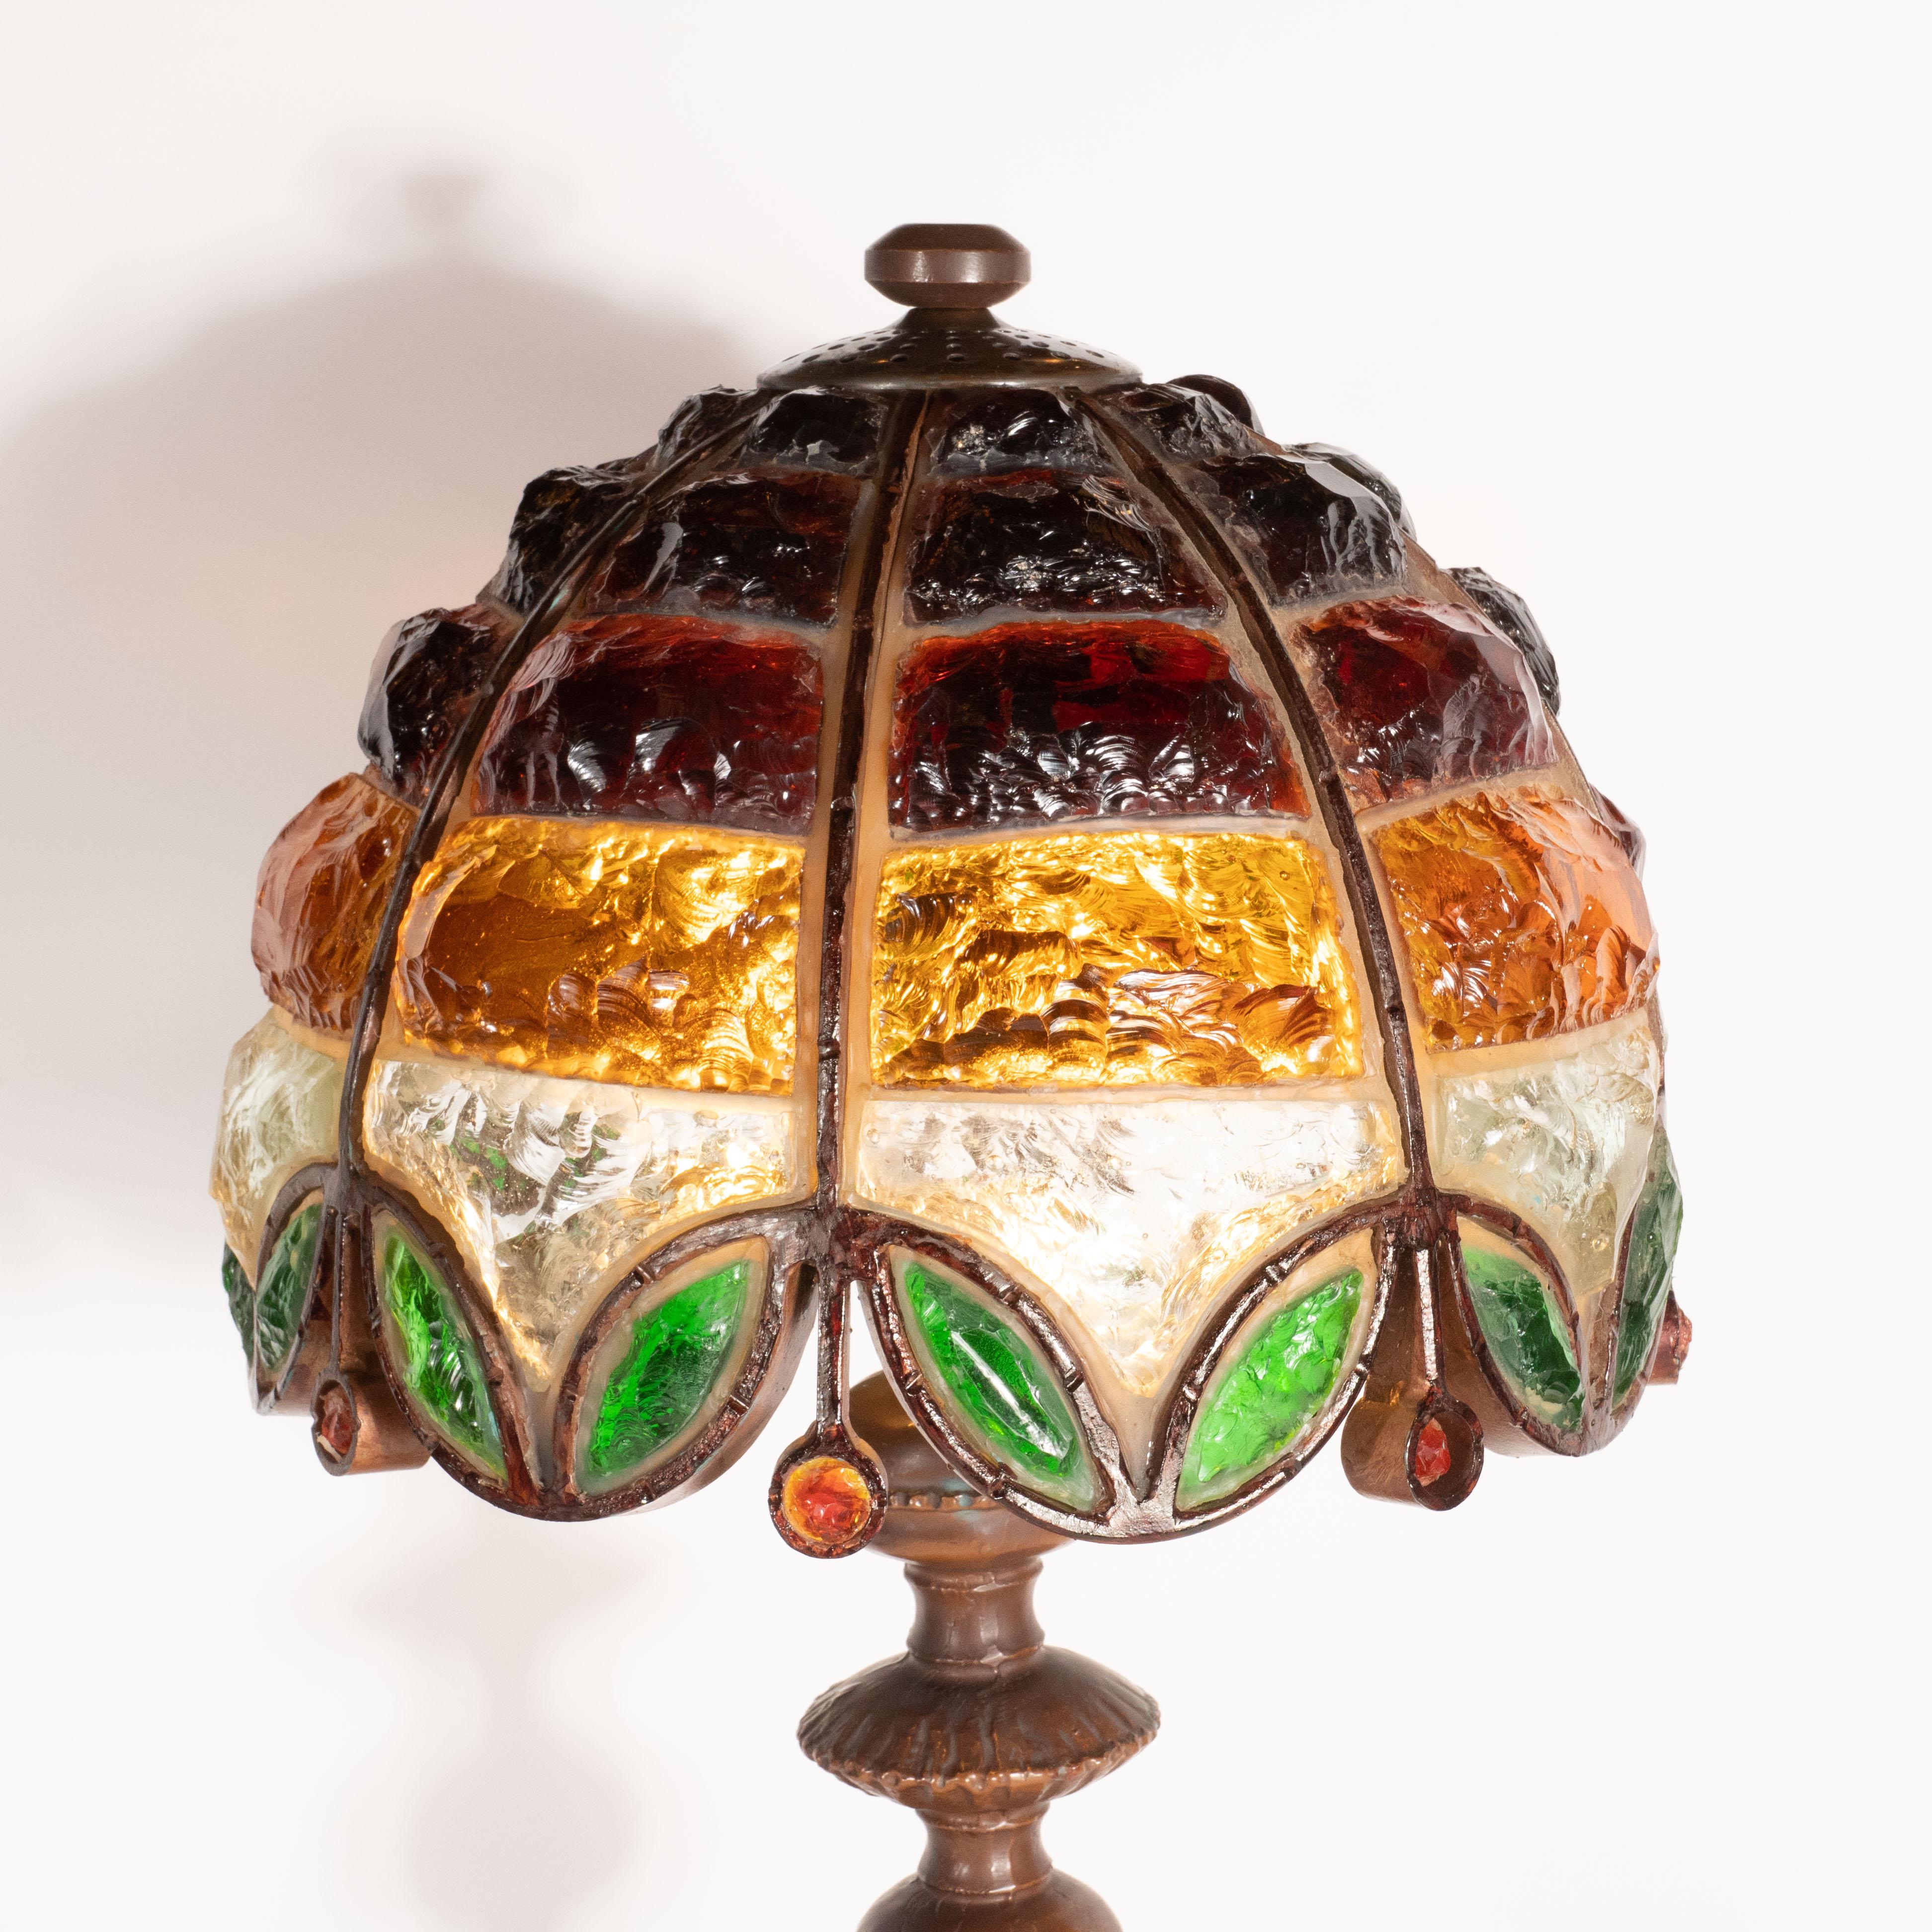 This gorgeous table lamp was crafted in the United States, circa 1920. It features a hand worked circular bronze base with a sculptural body offering an orbital detail in the center framed on either side by circular shell-like forms. The handblown